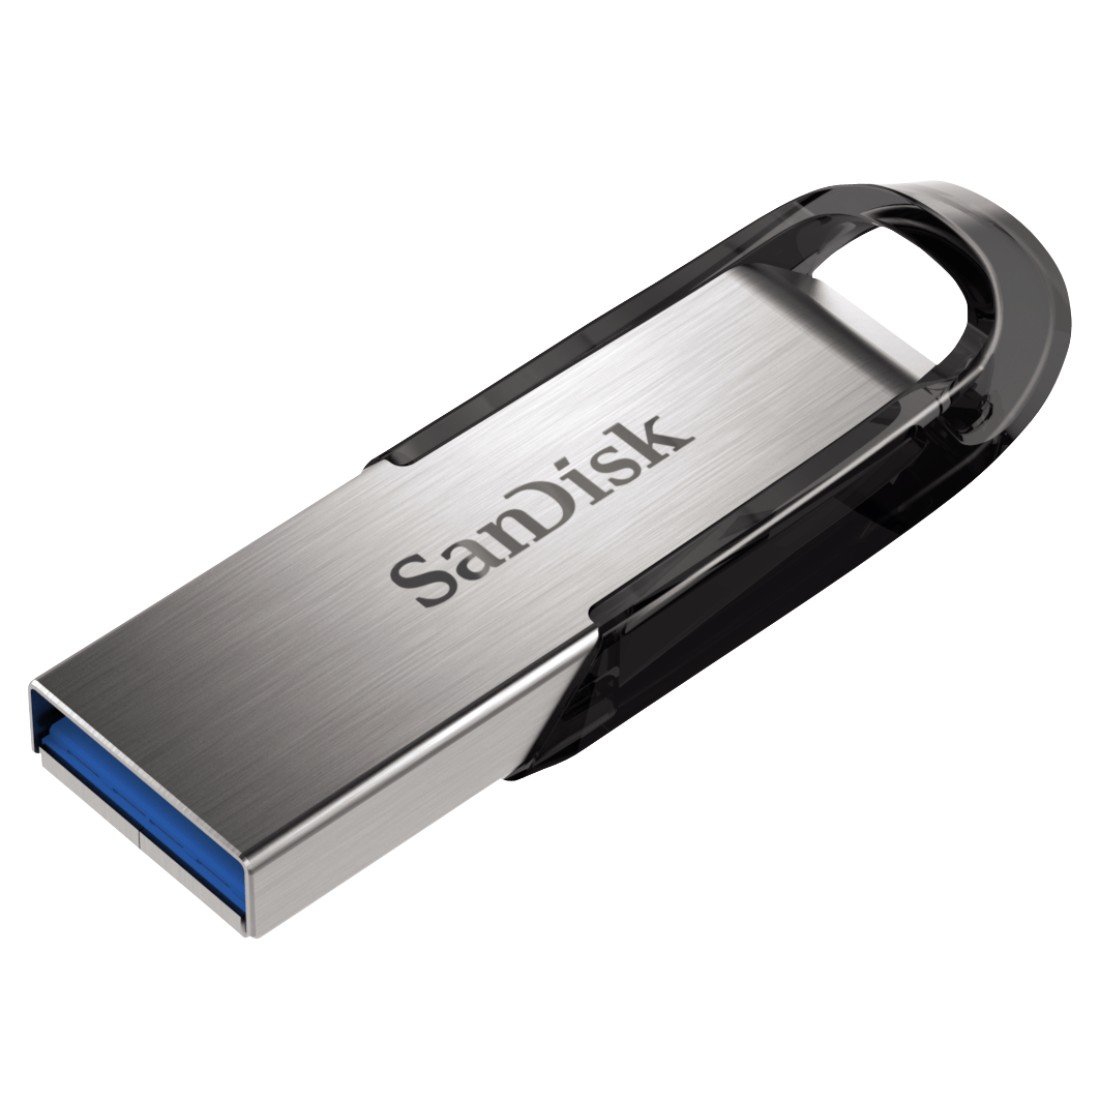 SanDisk Ultra Flair 3.0 128 GB solo 17,9€